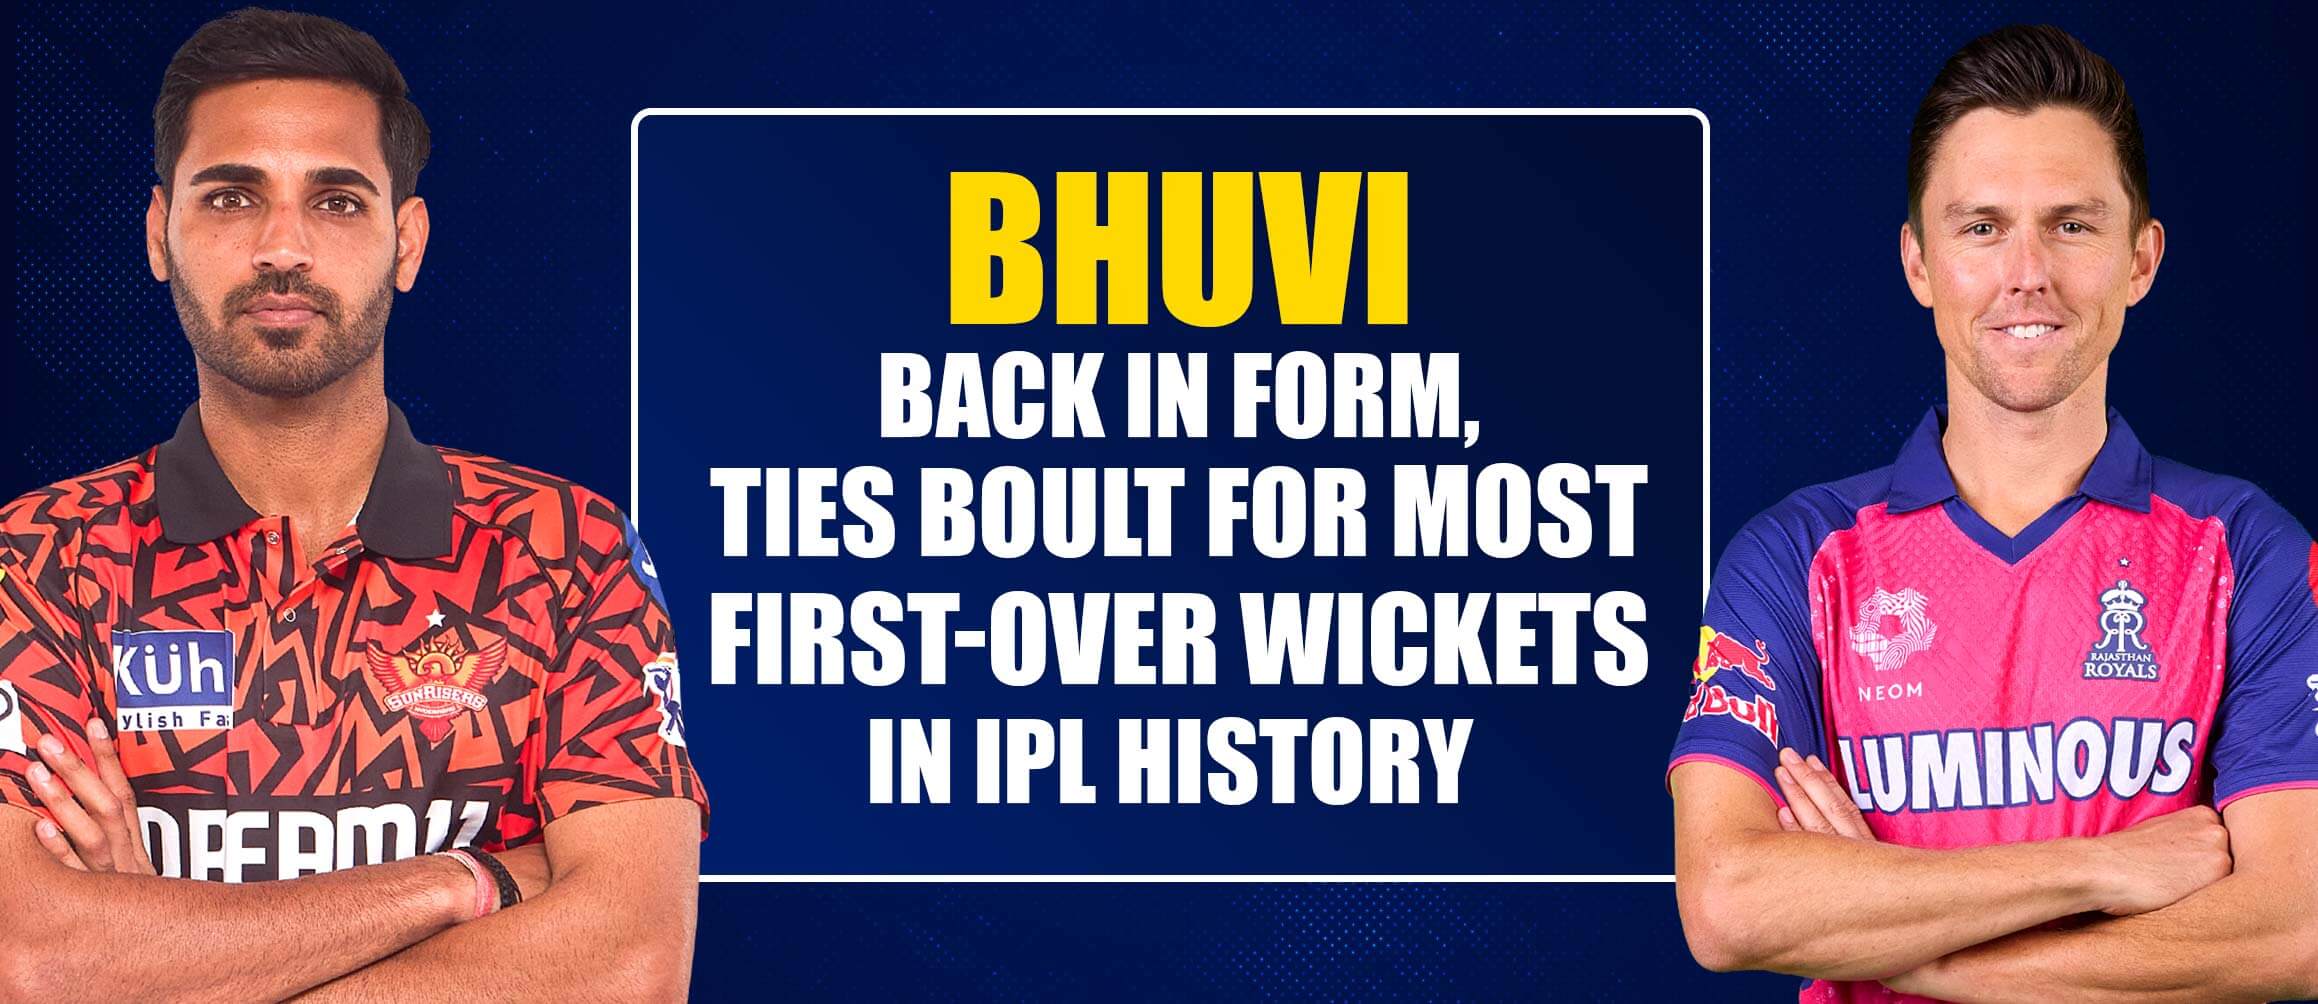 Bhuvi Back in Form, Ties Boult for Most First-Over Wickets in IPL History